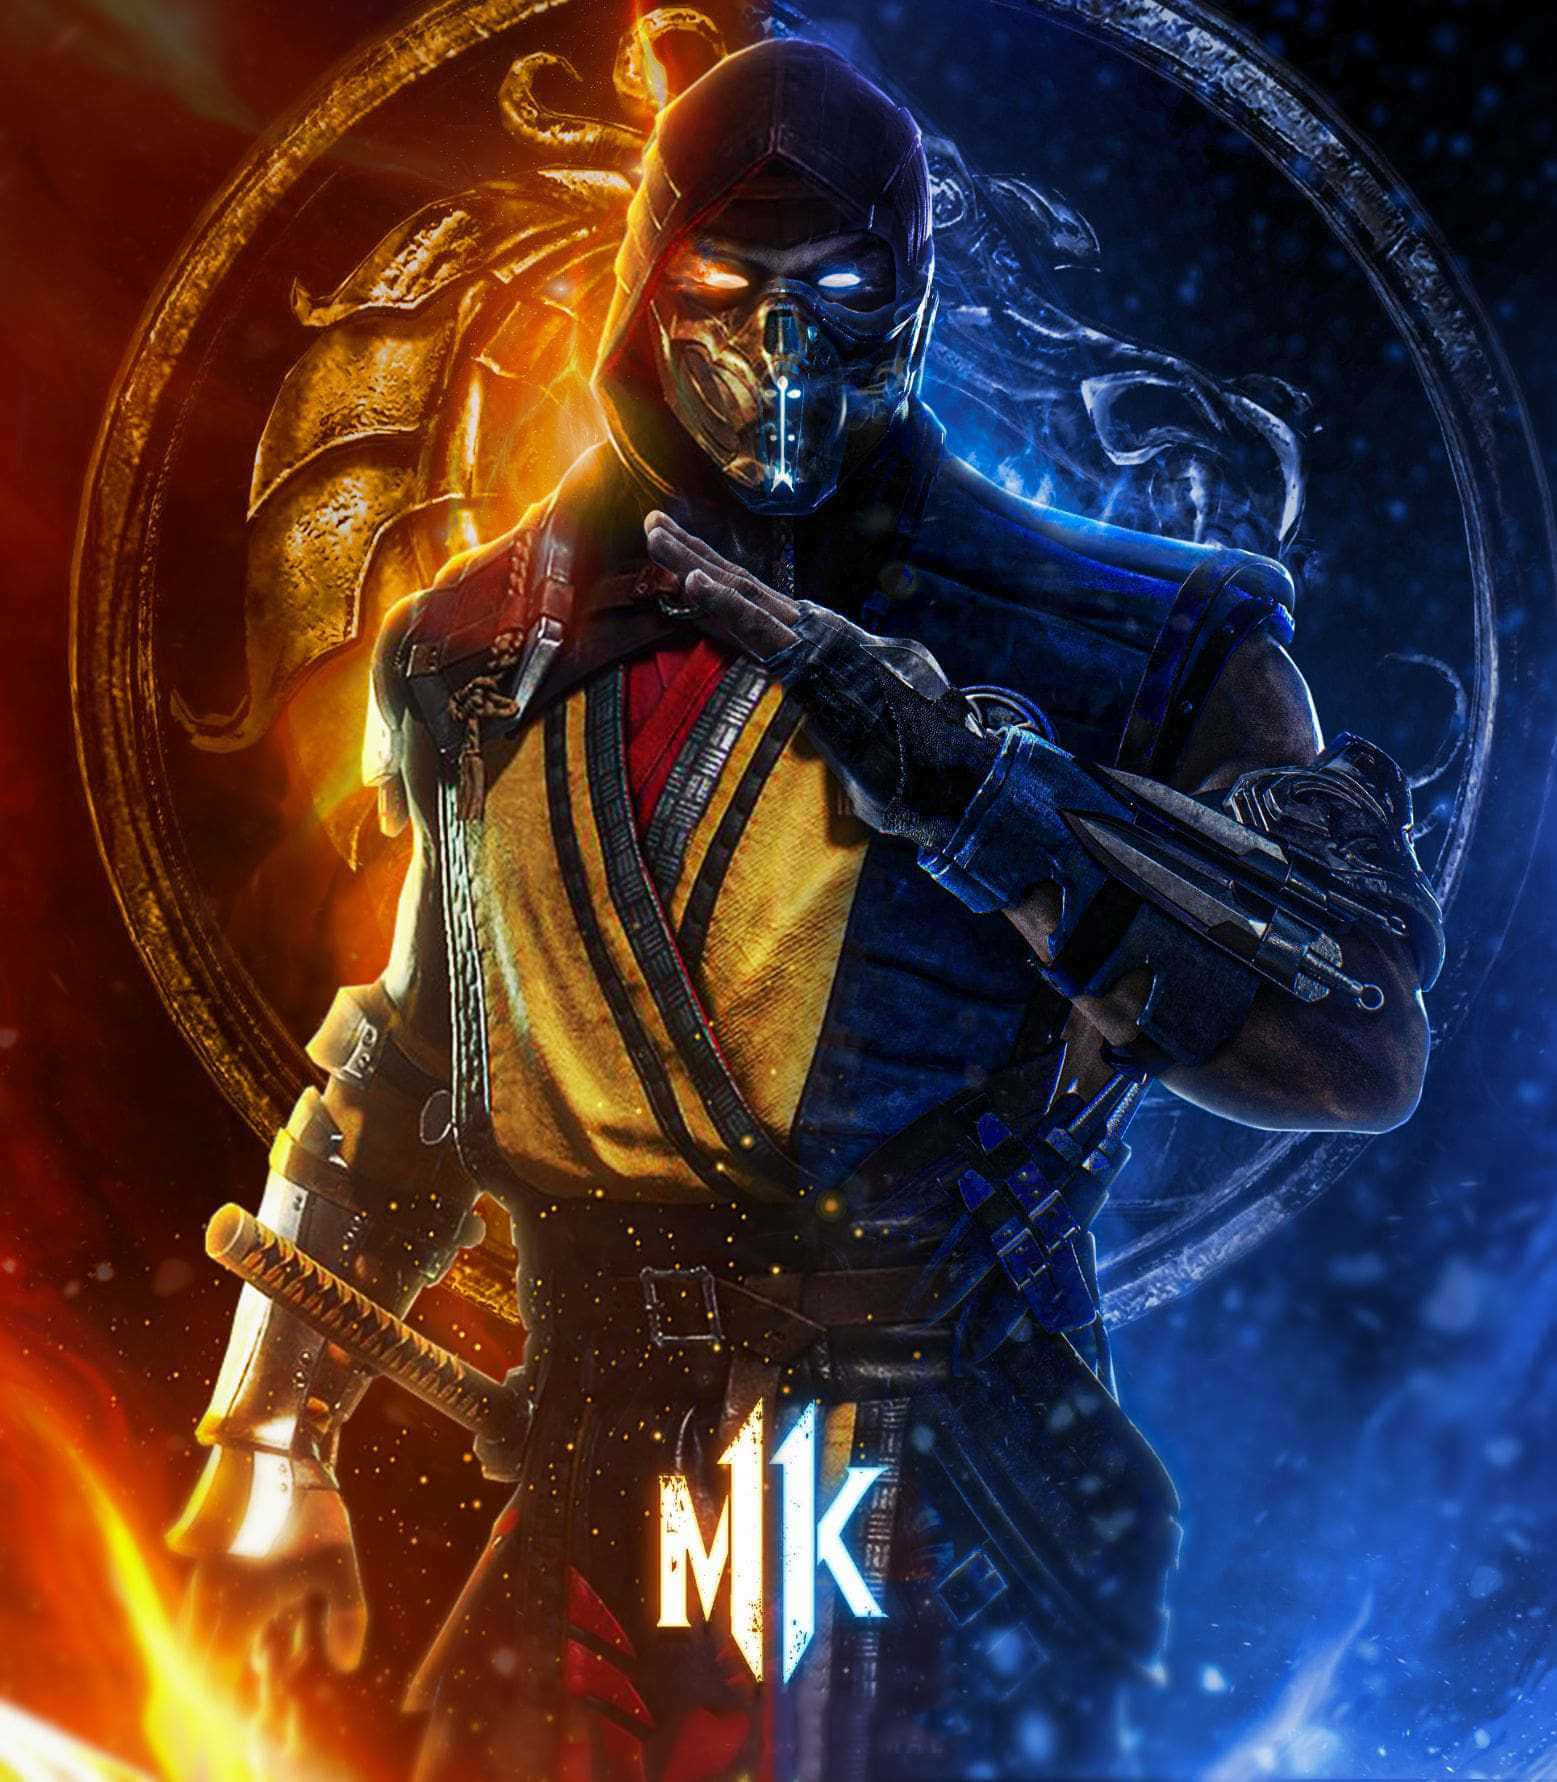 Get ready to FIGHT in Mortal Kombat!